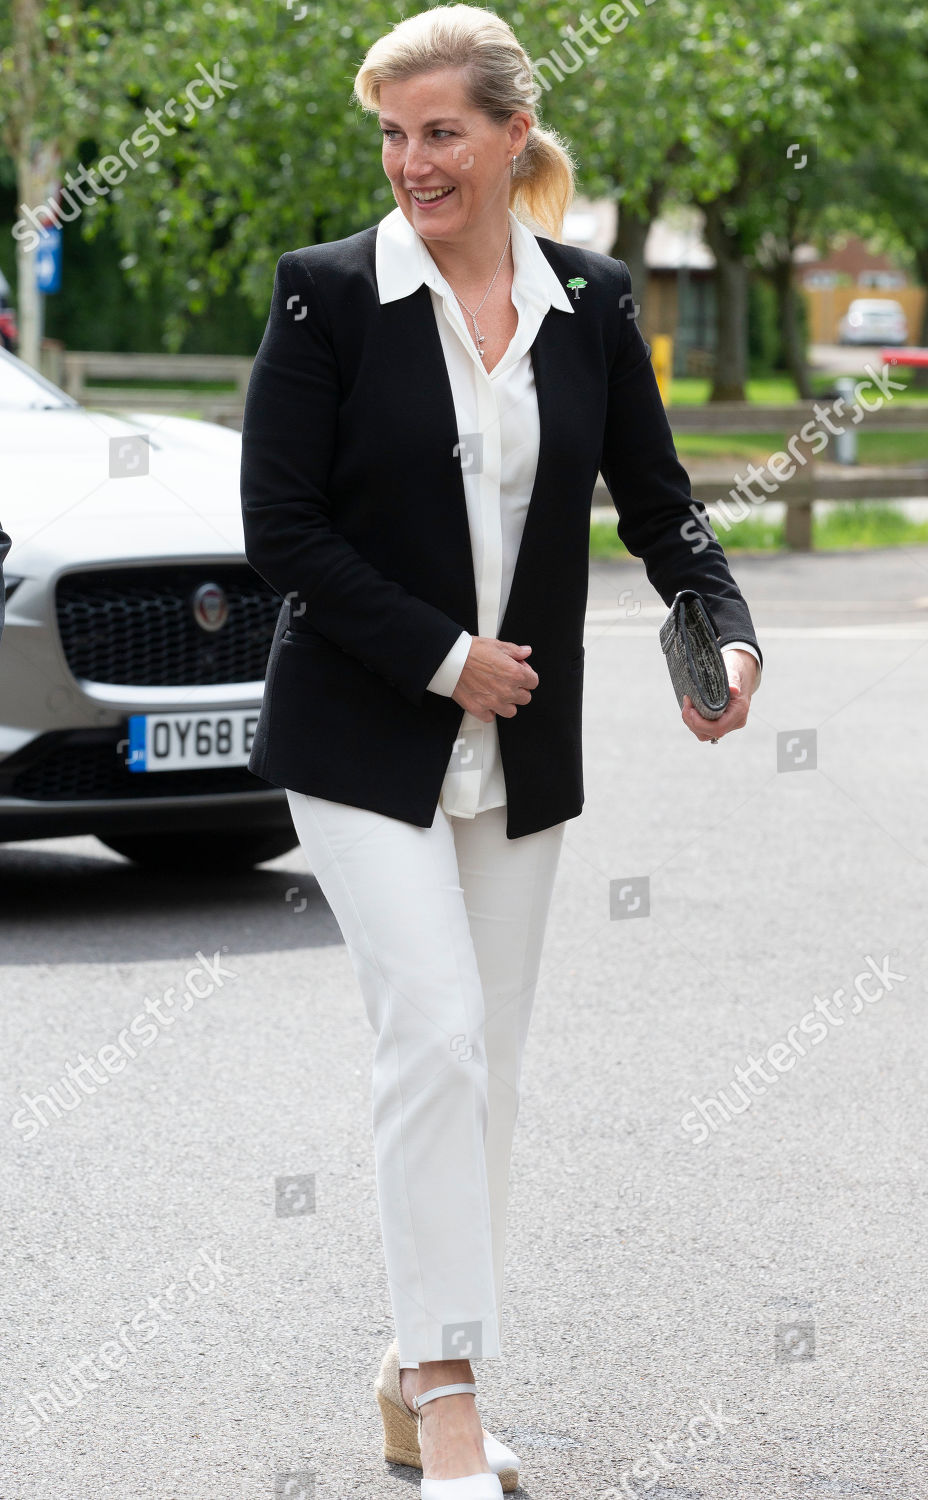 sophie-countess-of-wessex-visits-the-treloar-trust-college-holybourne-uk-shutterstock-editorial-10279529h.jpg